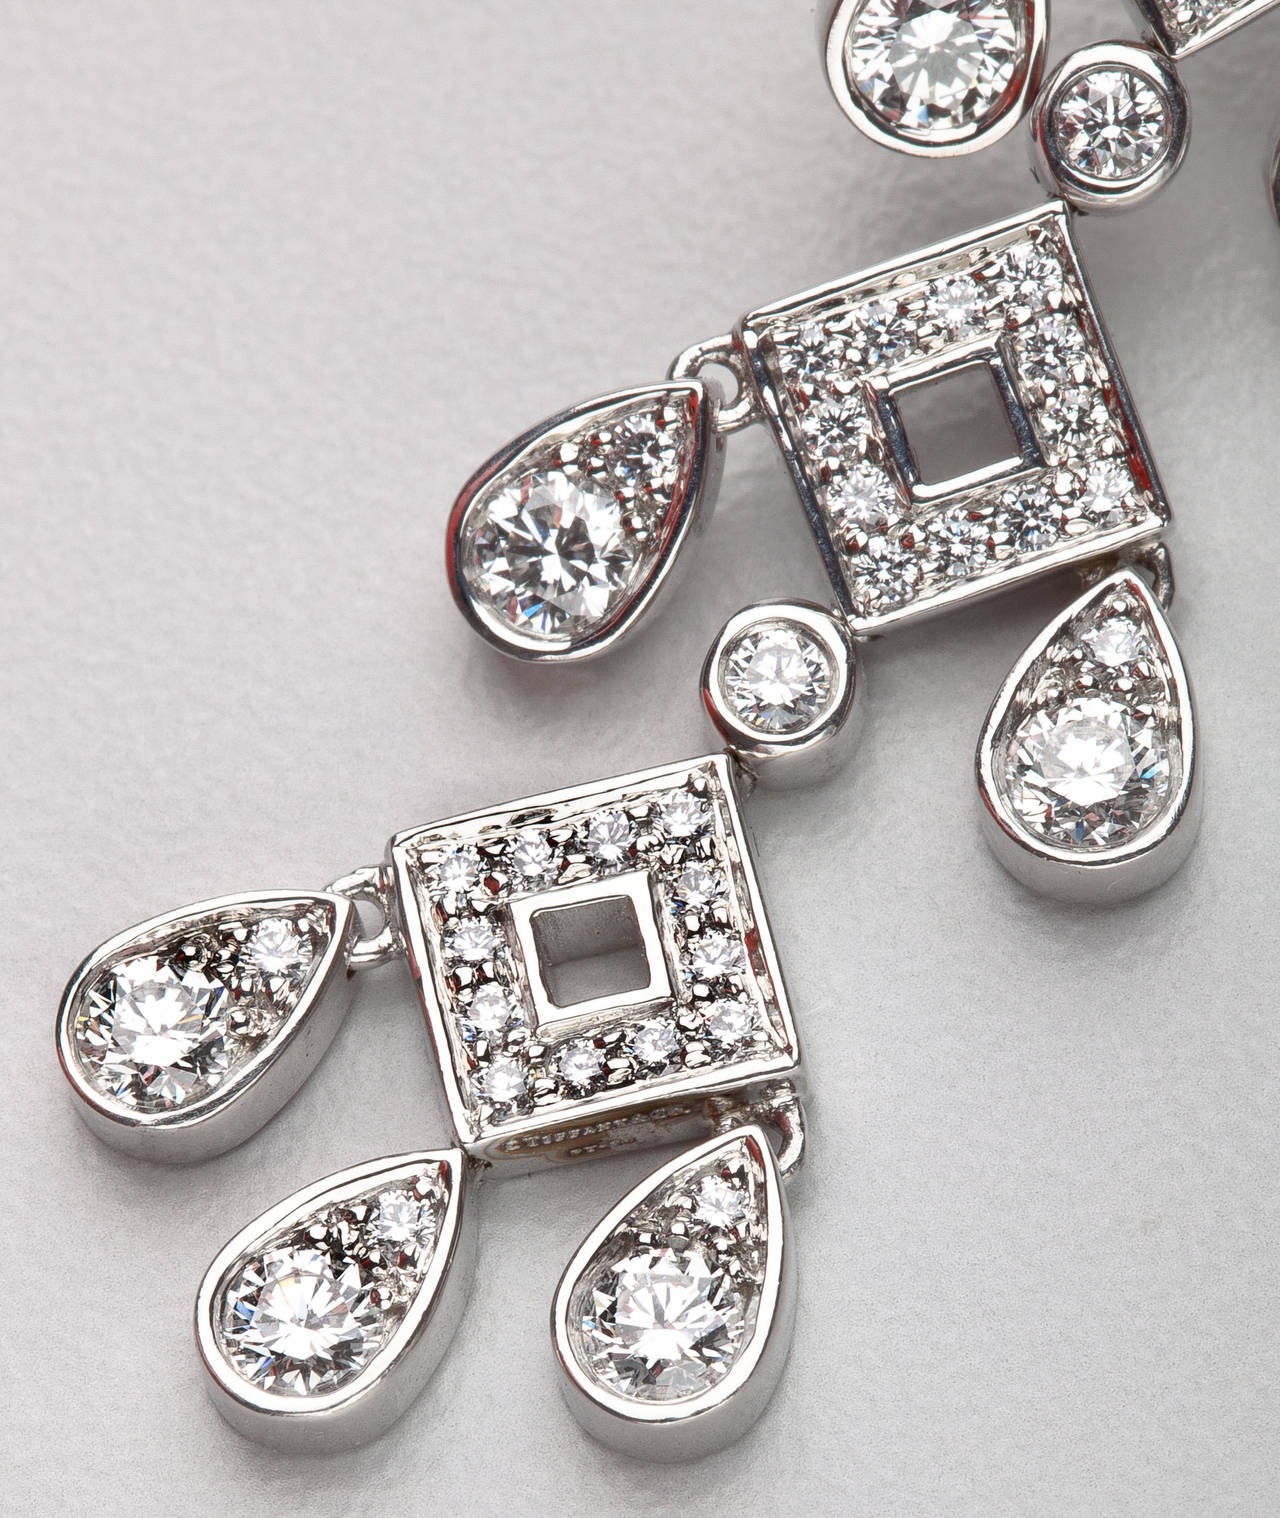 An elegant pair of platinum and diamond earrings by Tiffany & Co. from their 